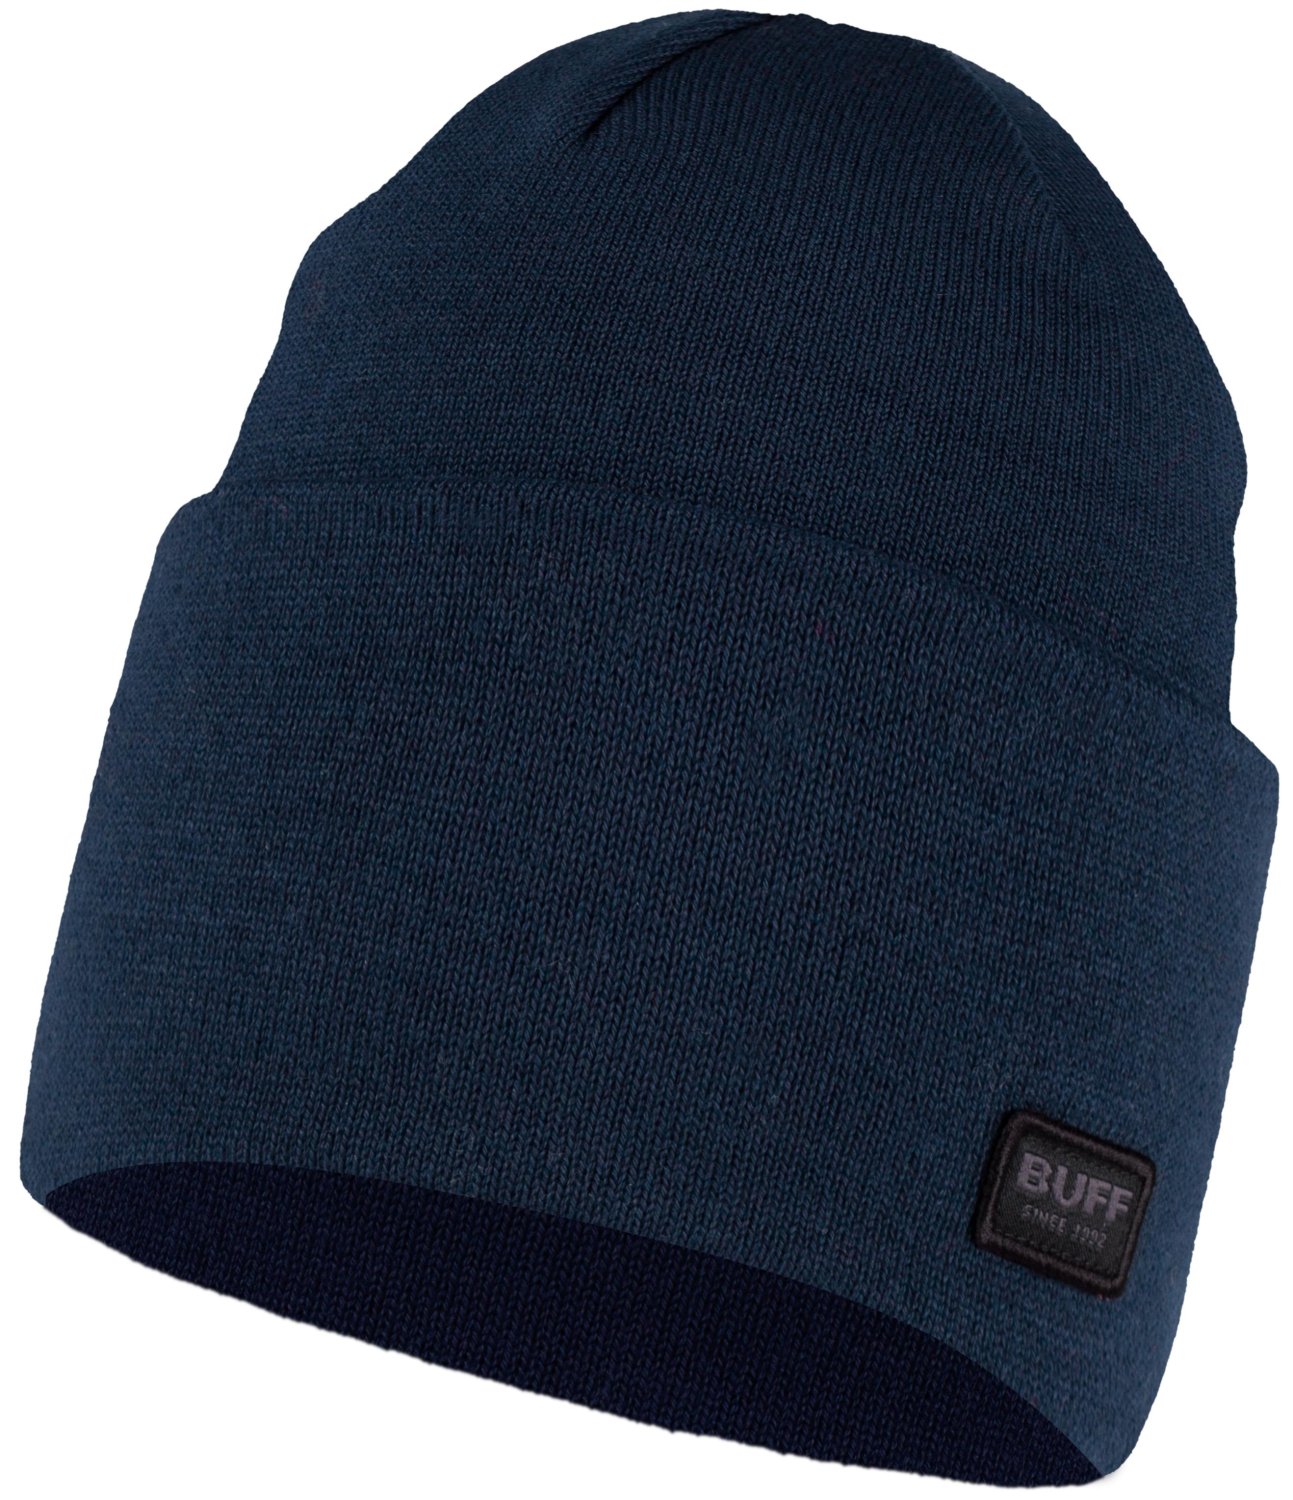 Шапка Buff Knitted Hat Niels Denim, US:one size, 126457.788.10.00 шапка buff knitted hat niels niels evo silversage us one size 126457 313 10 00